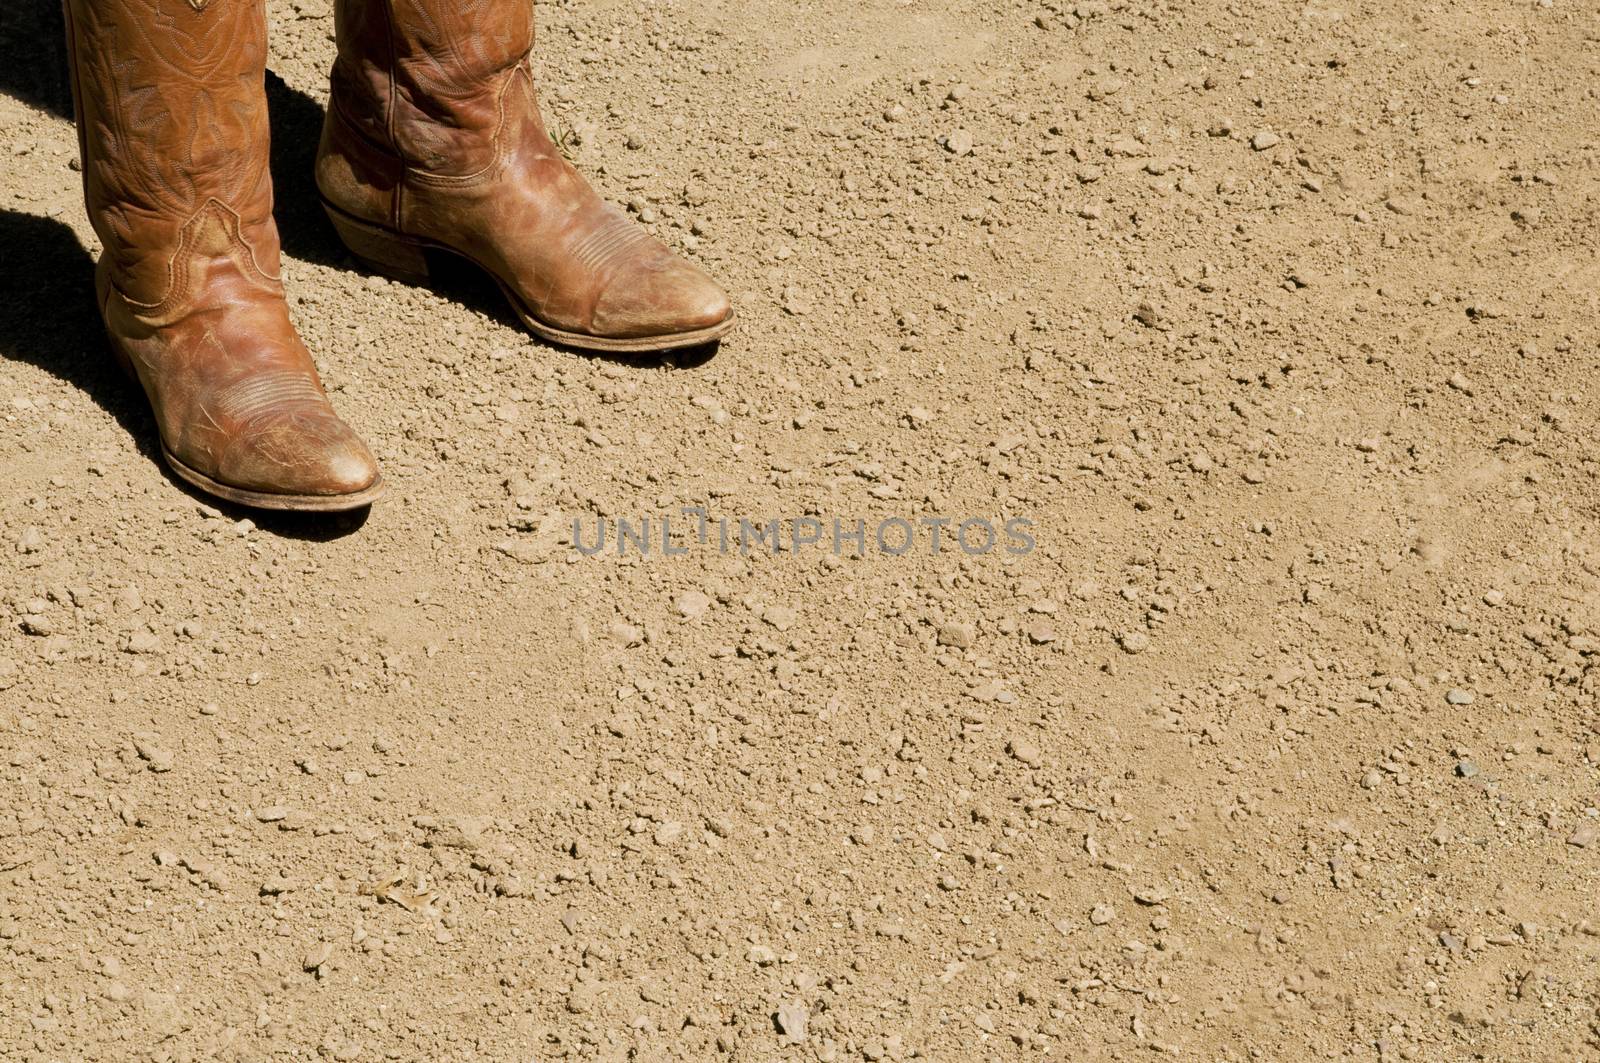 Two dirty western cowboy boots standing on dirt ground by Balefire9